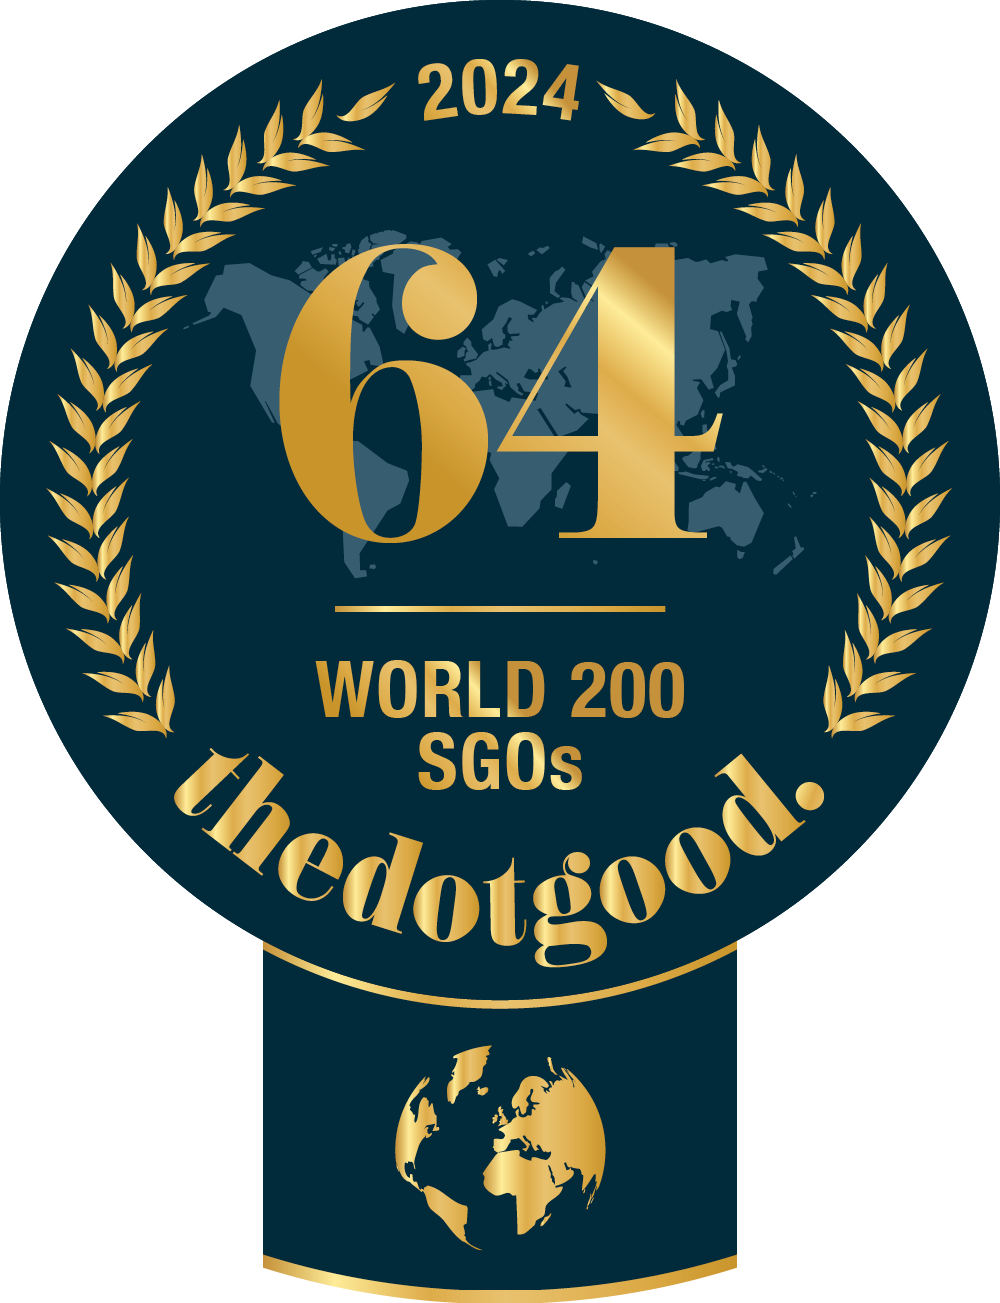 ANUDIP FOUNDATION FOR SOCIAL WELFARE is world ranked on thedotgood.